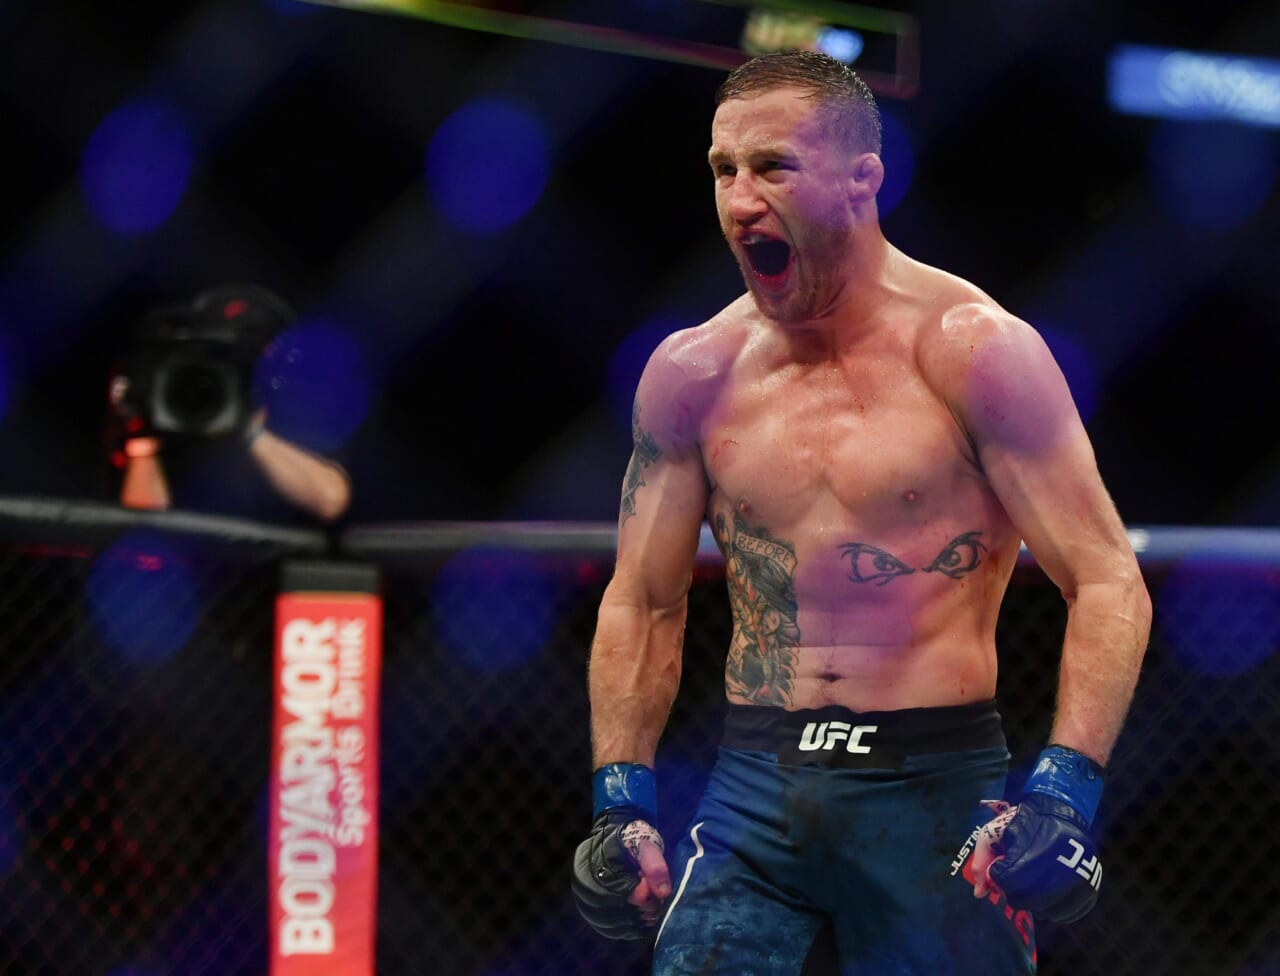 After coming up short at UFC 274, what’s next for Justin Gaethje?